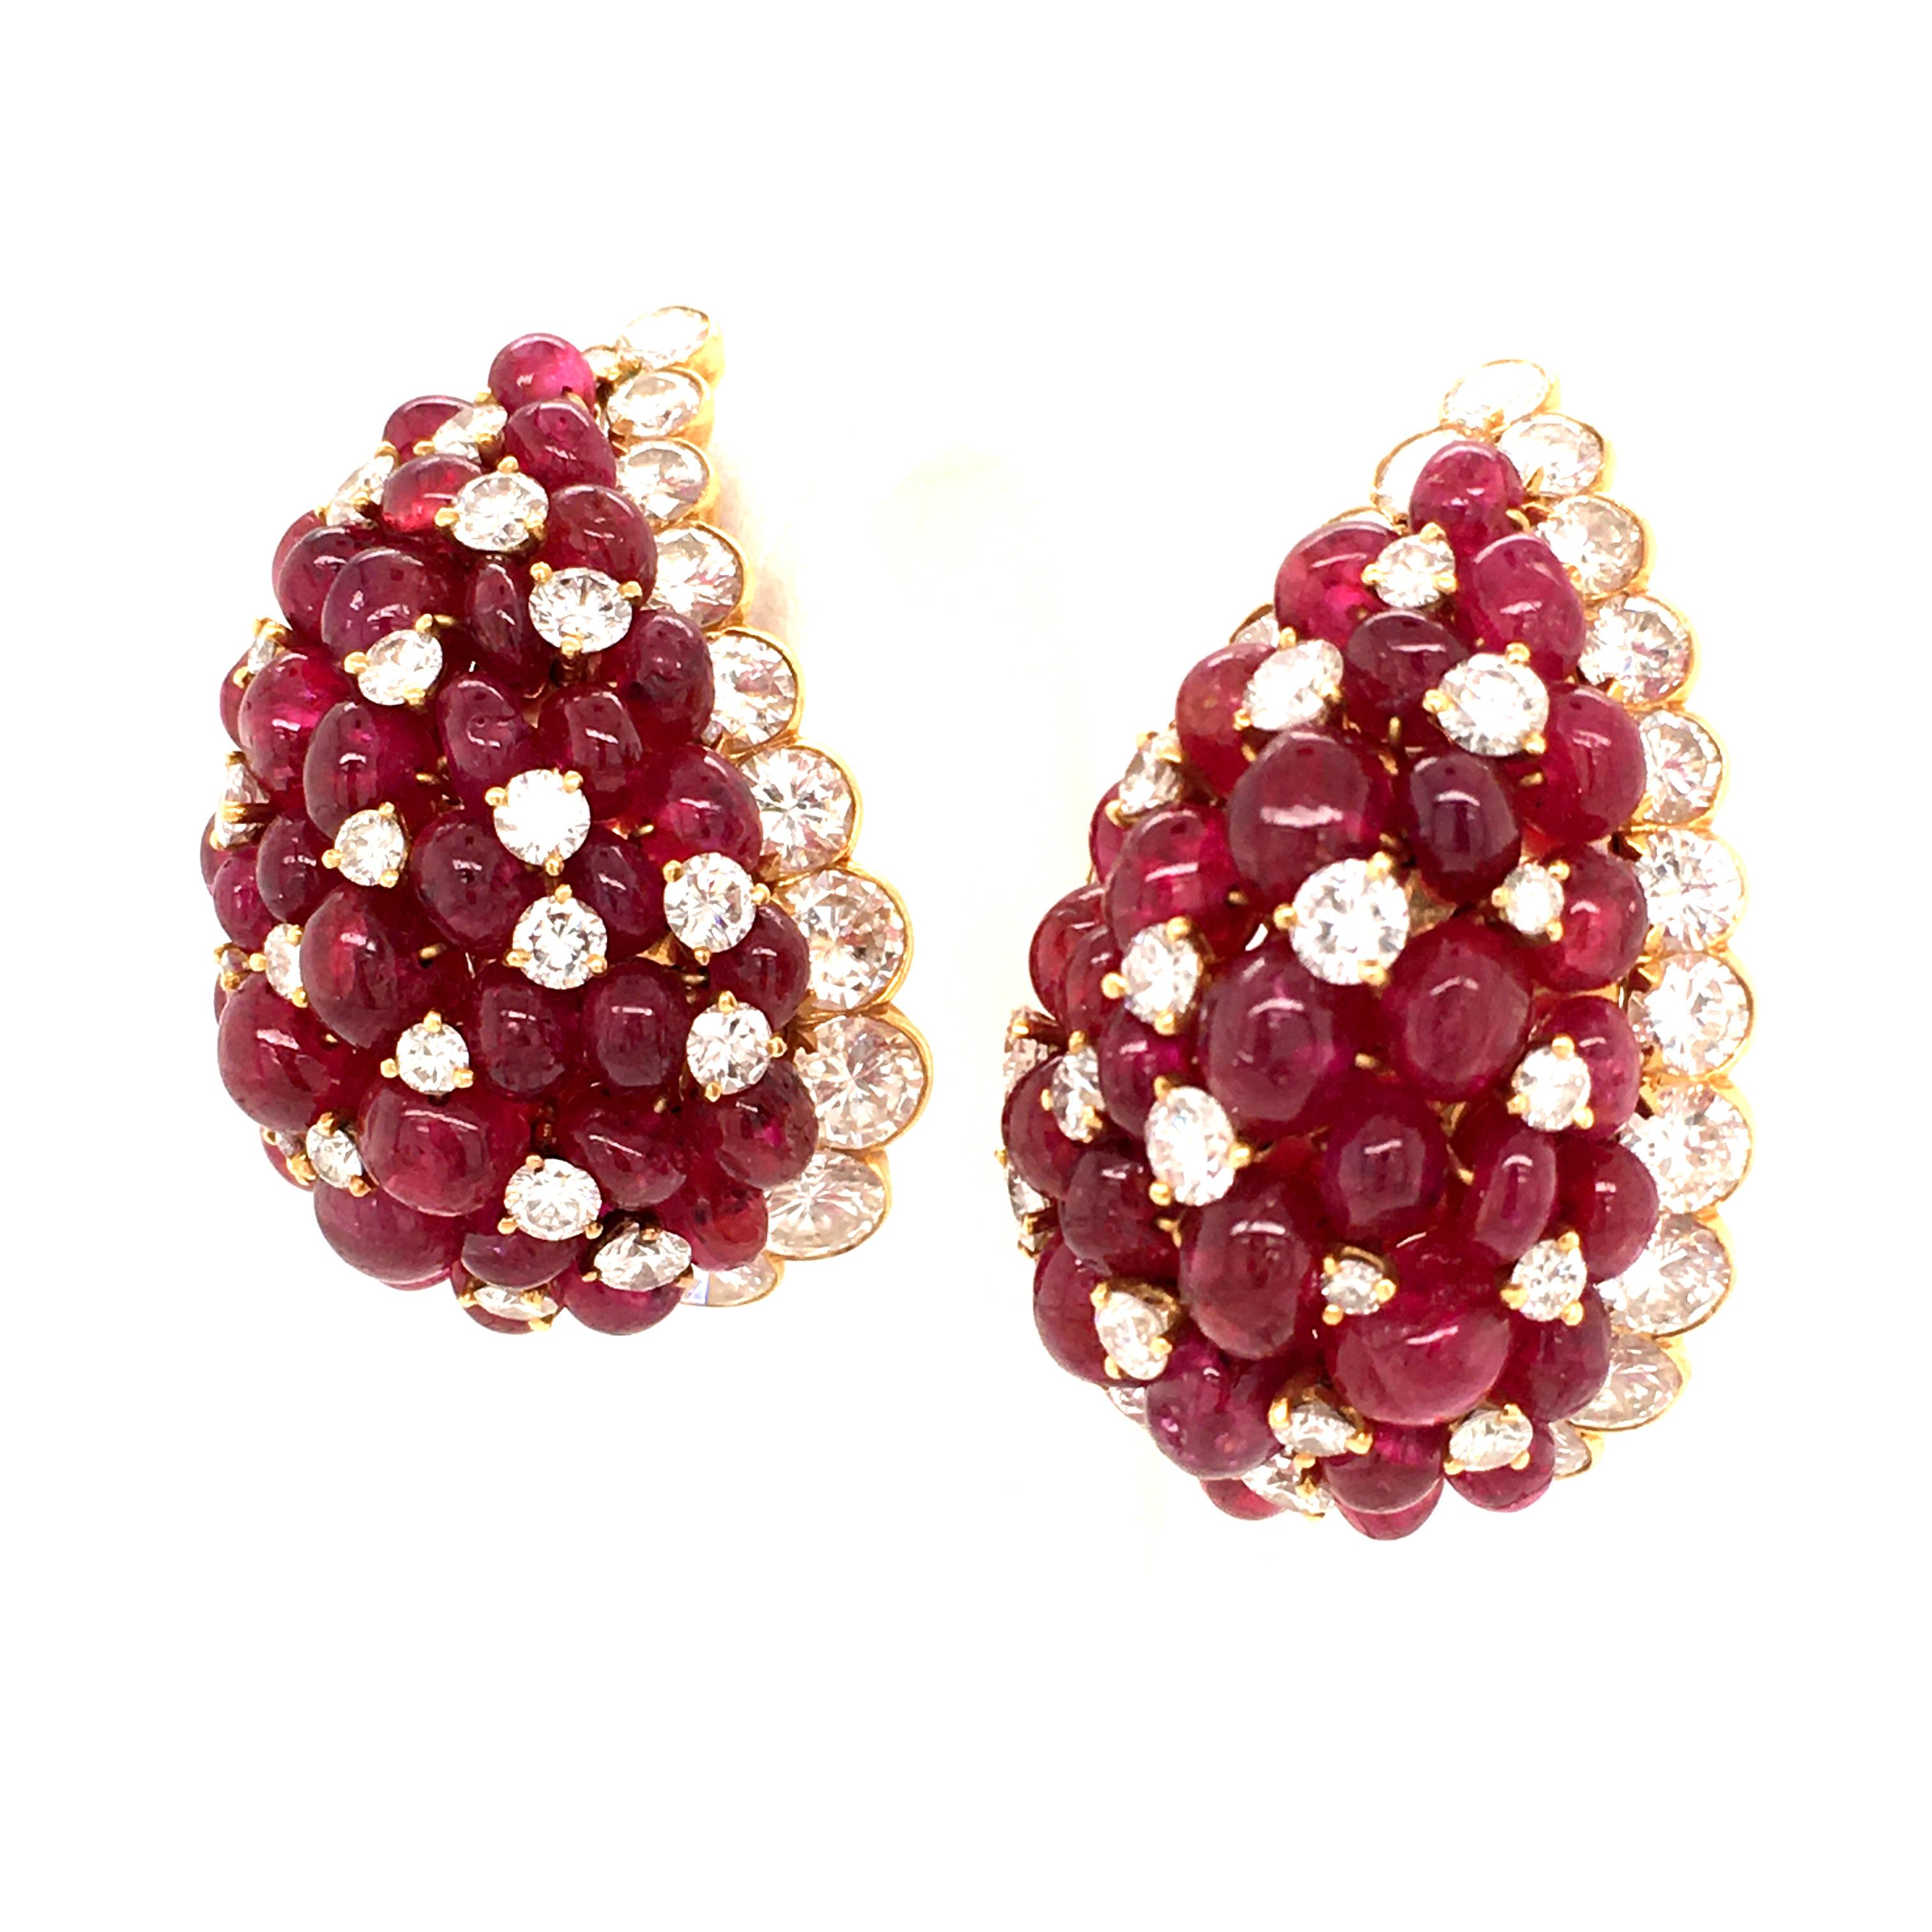 Rare Van Cleef & Arpels earclips from the 1970ies. Of bombé design, set with 64 bright red ruby beads. Ruby pattern interrupted by brilliant-cut diamonds and in framed by an entourage of round diamonds. The diamonds total up to 80 stones weighing an